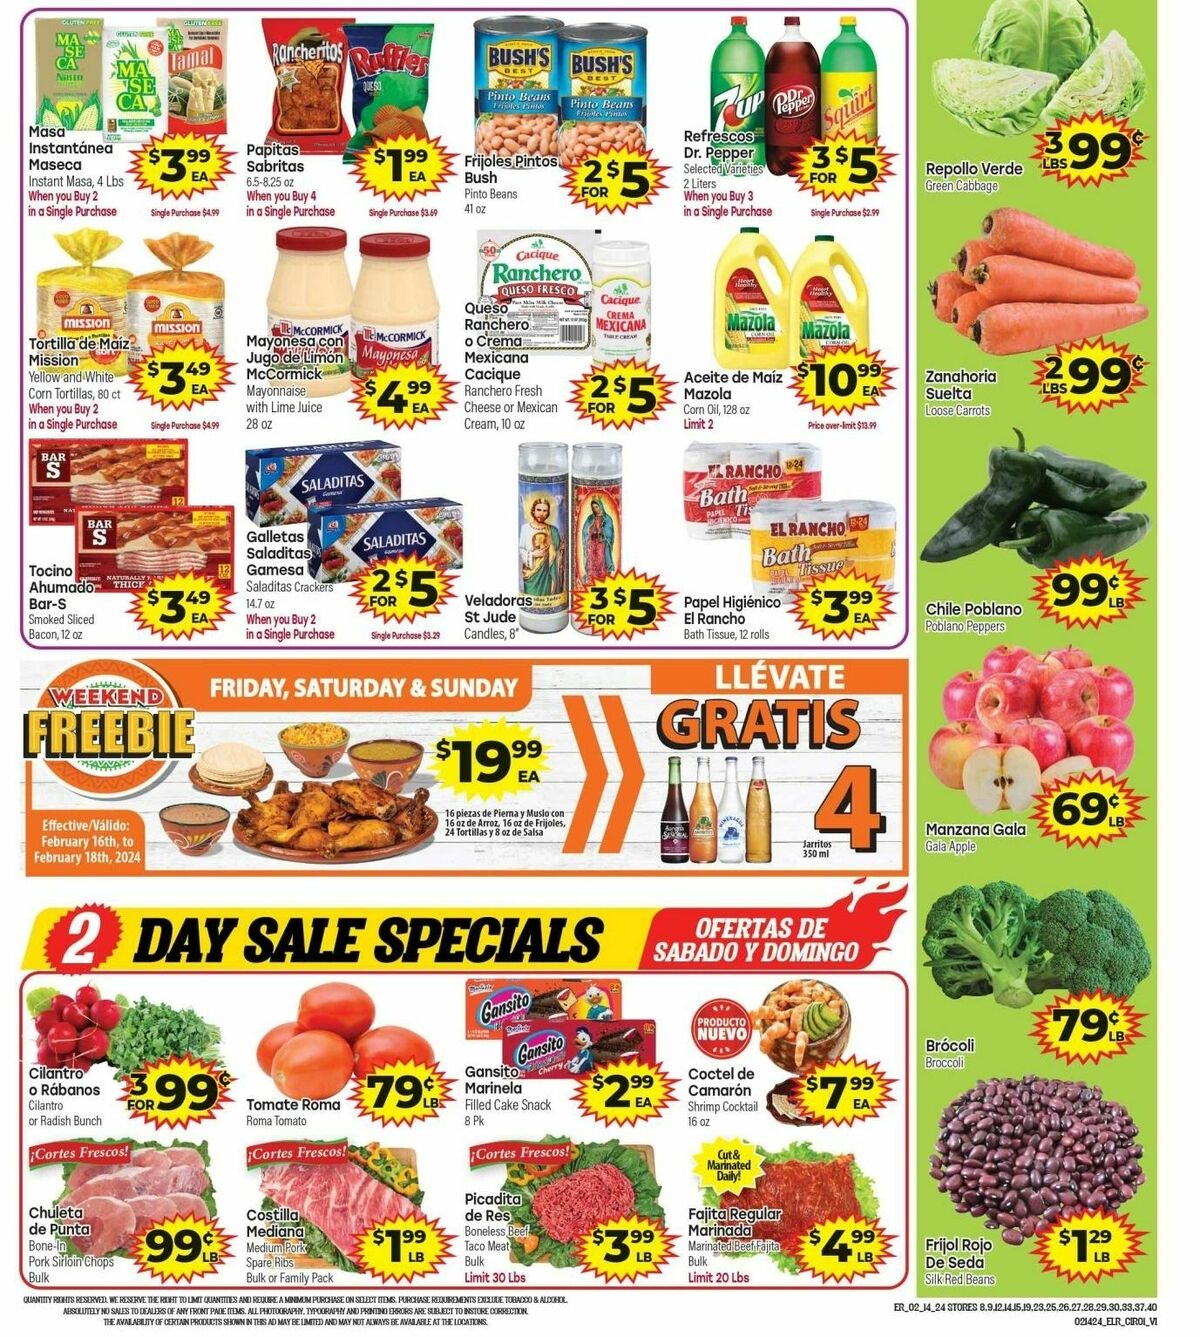 El Rancho Weekly Ad from February 14